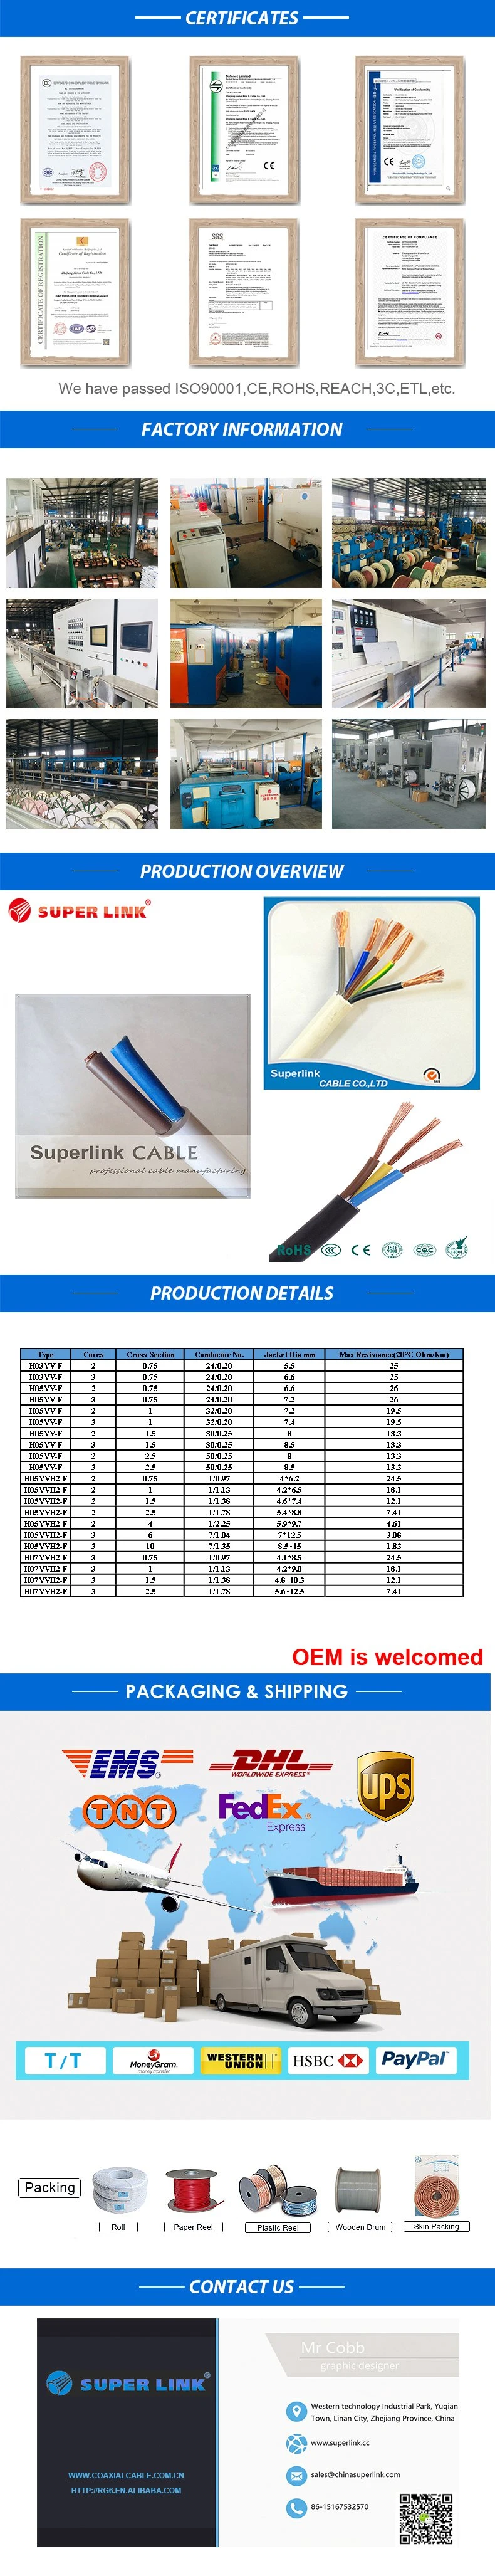 China Supply American Standard Power Cord American American Plug Control Cable Oxygen-Free Copper